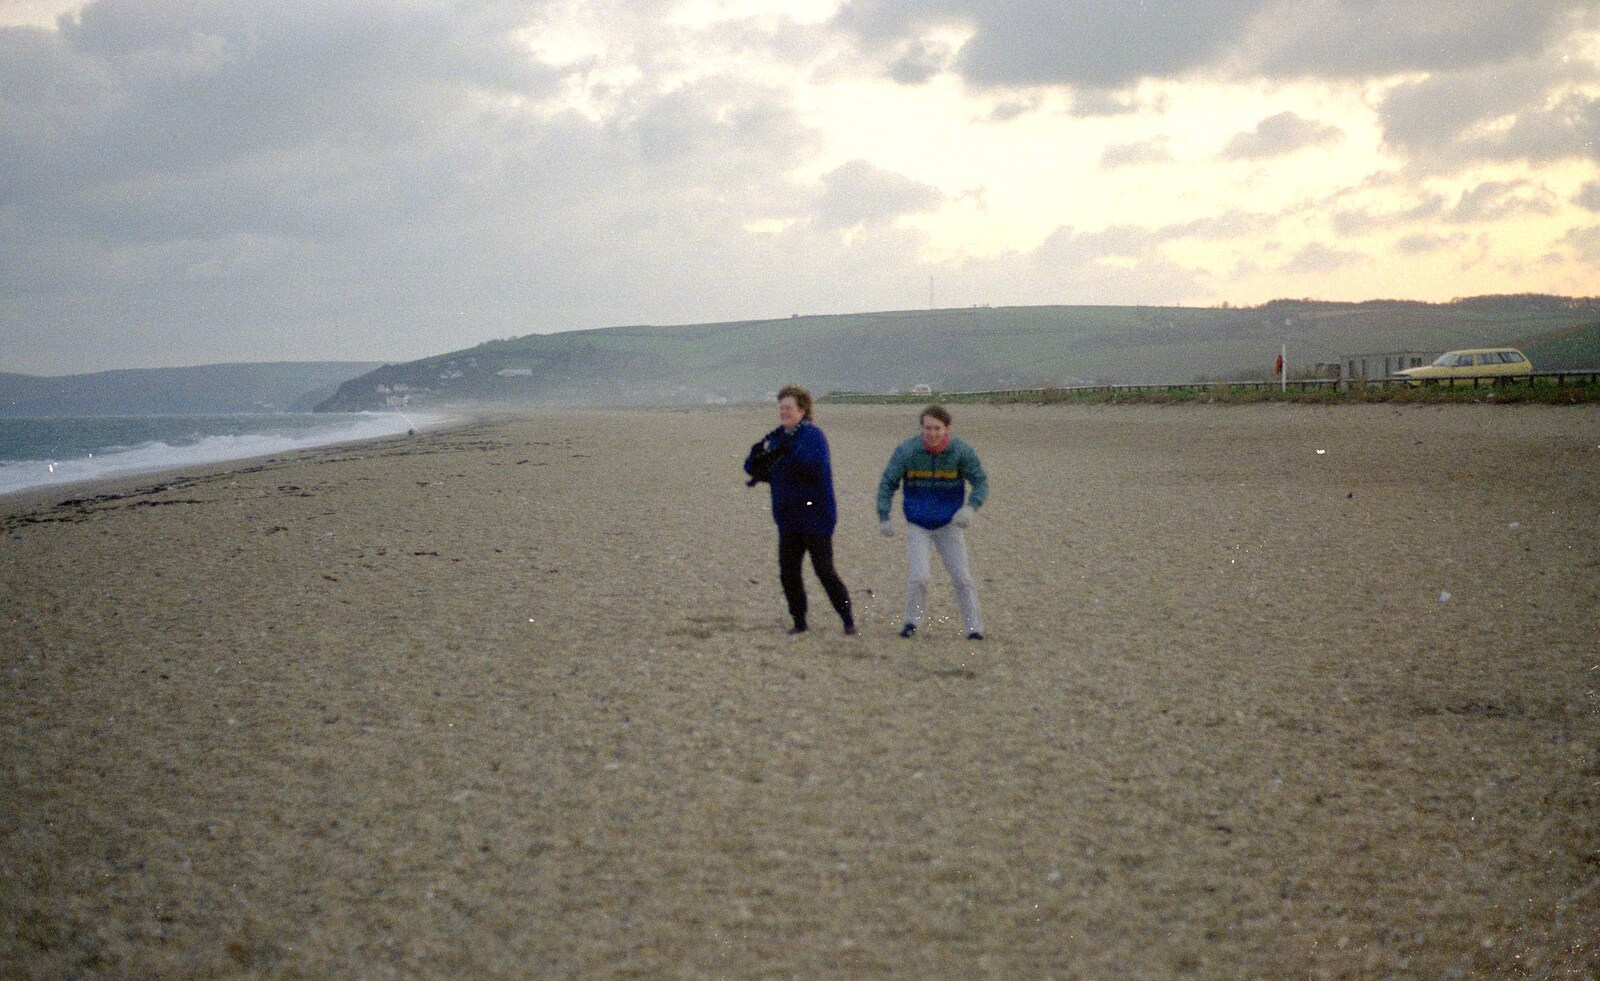 Kate and Dave on Slapton Sands from Uni: Wembury and Slapton, Devon - 18th March 1989